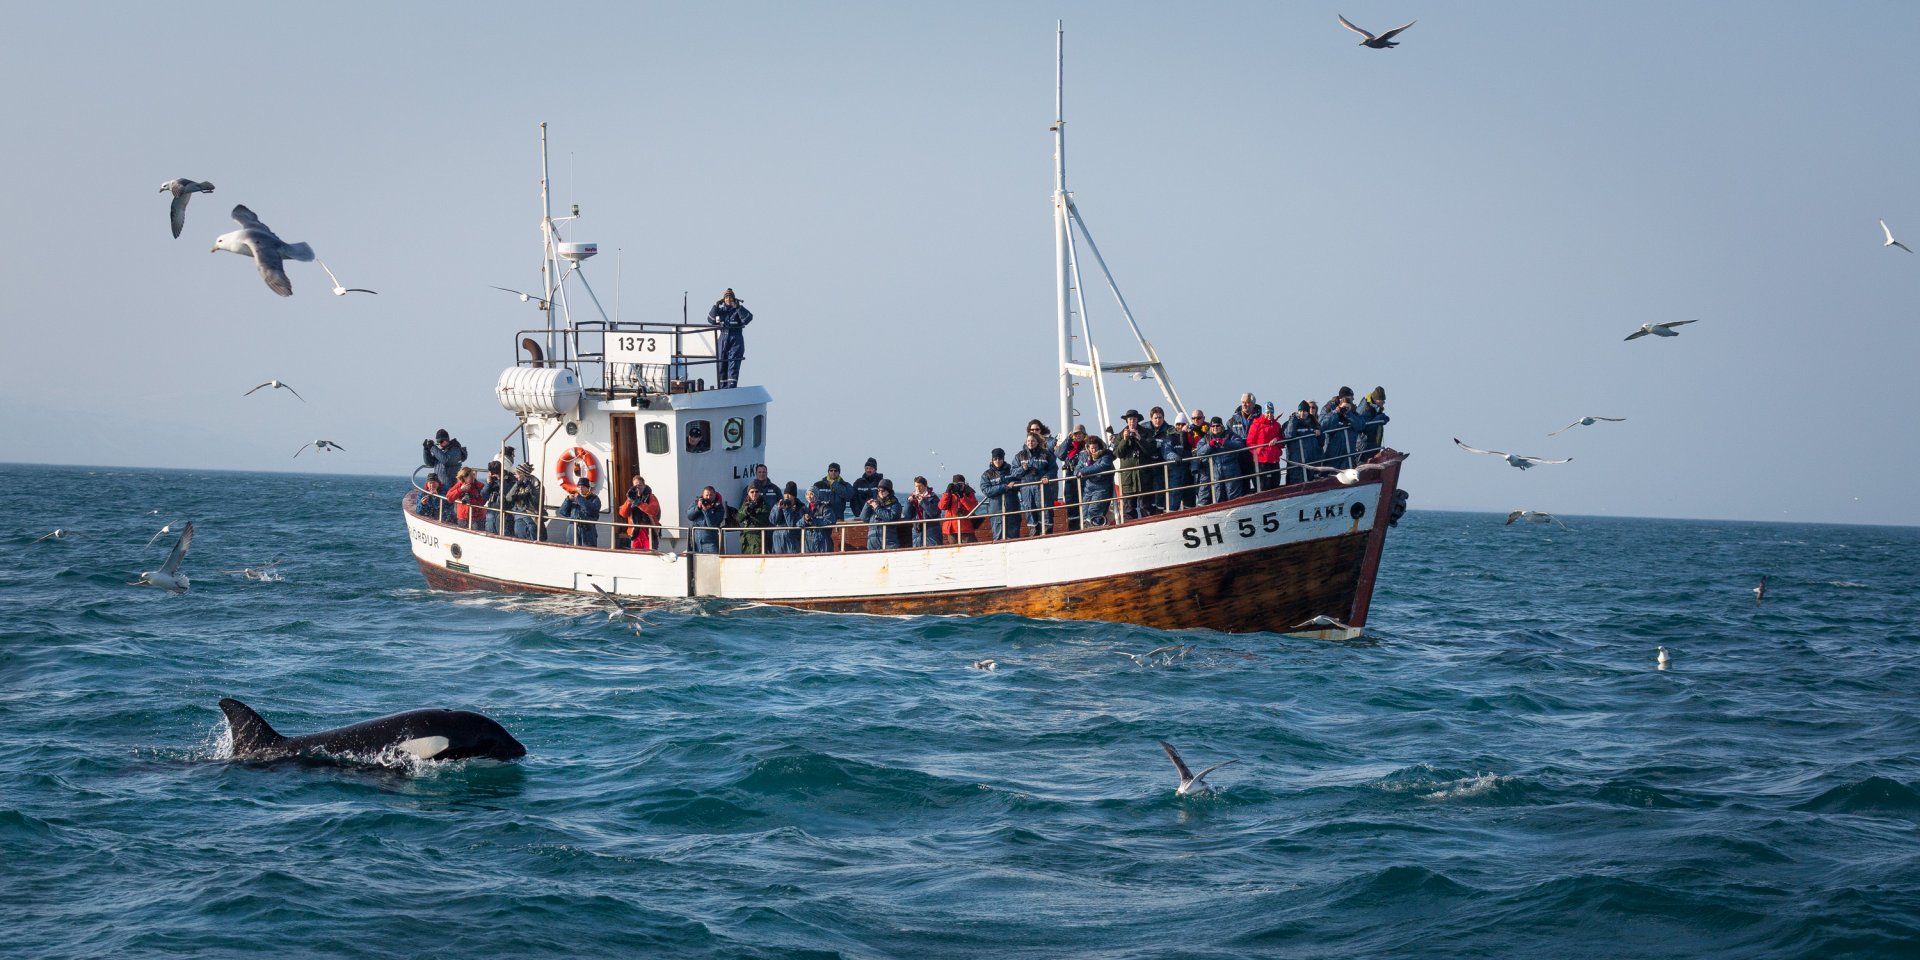 Whale watching is a popular activity in Iceland. Photo: Ragnar Th. Sigurðsson